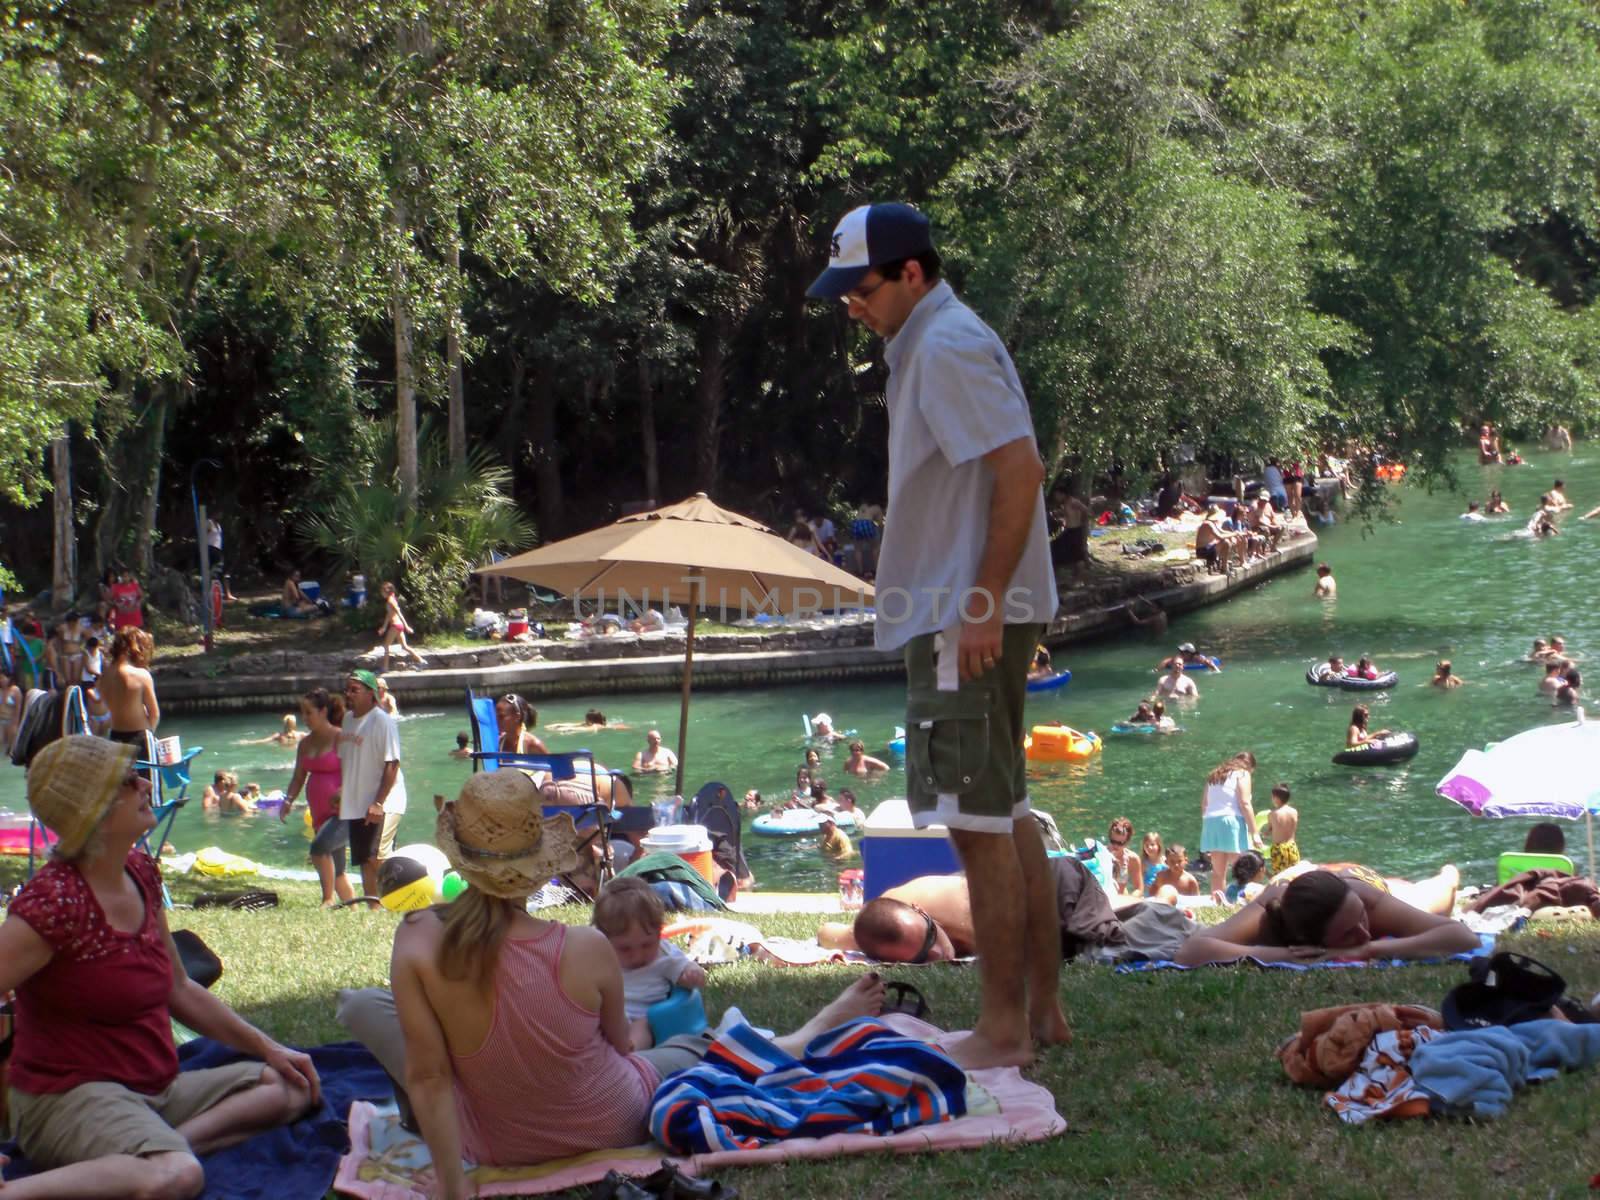 A crowd of people are lying in the sun while others are relaxing in the shade including some that are swimming inside a springwater fed pool at a state park